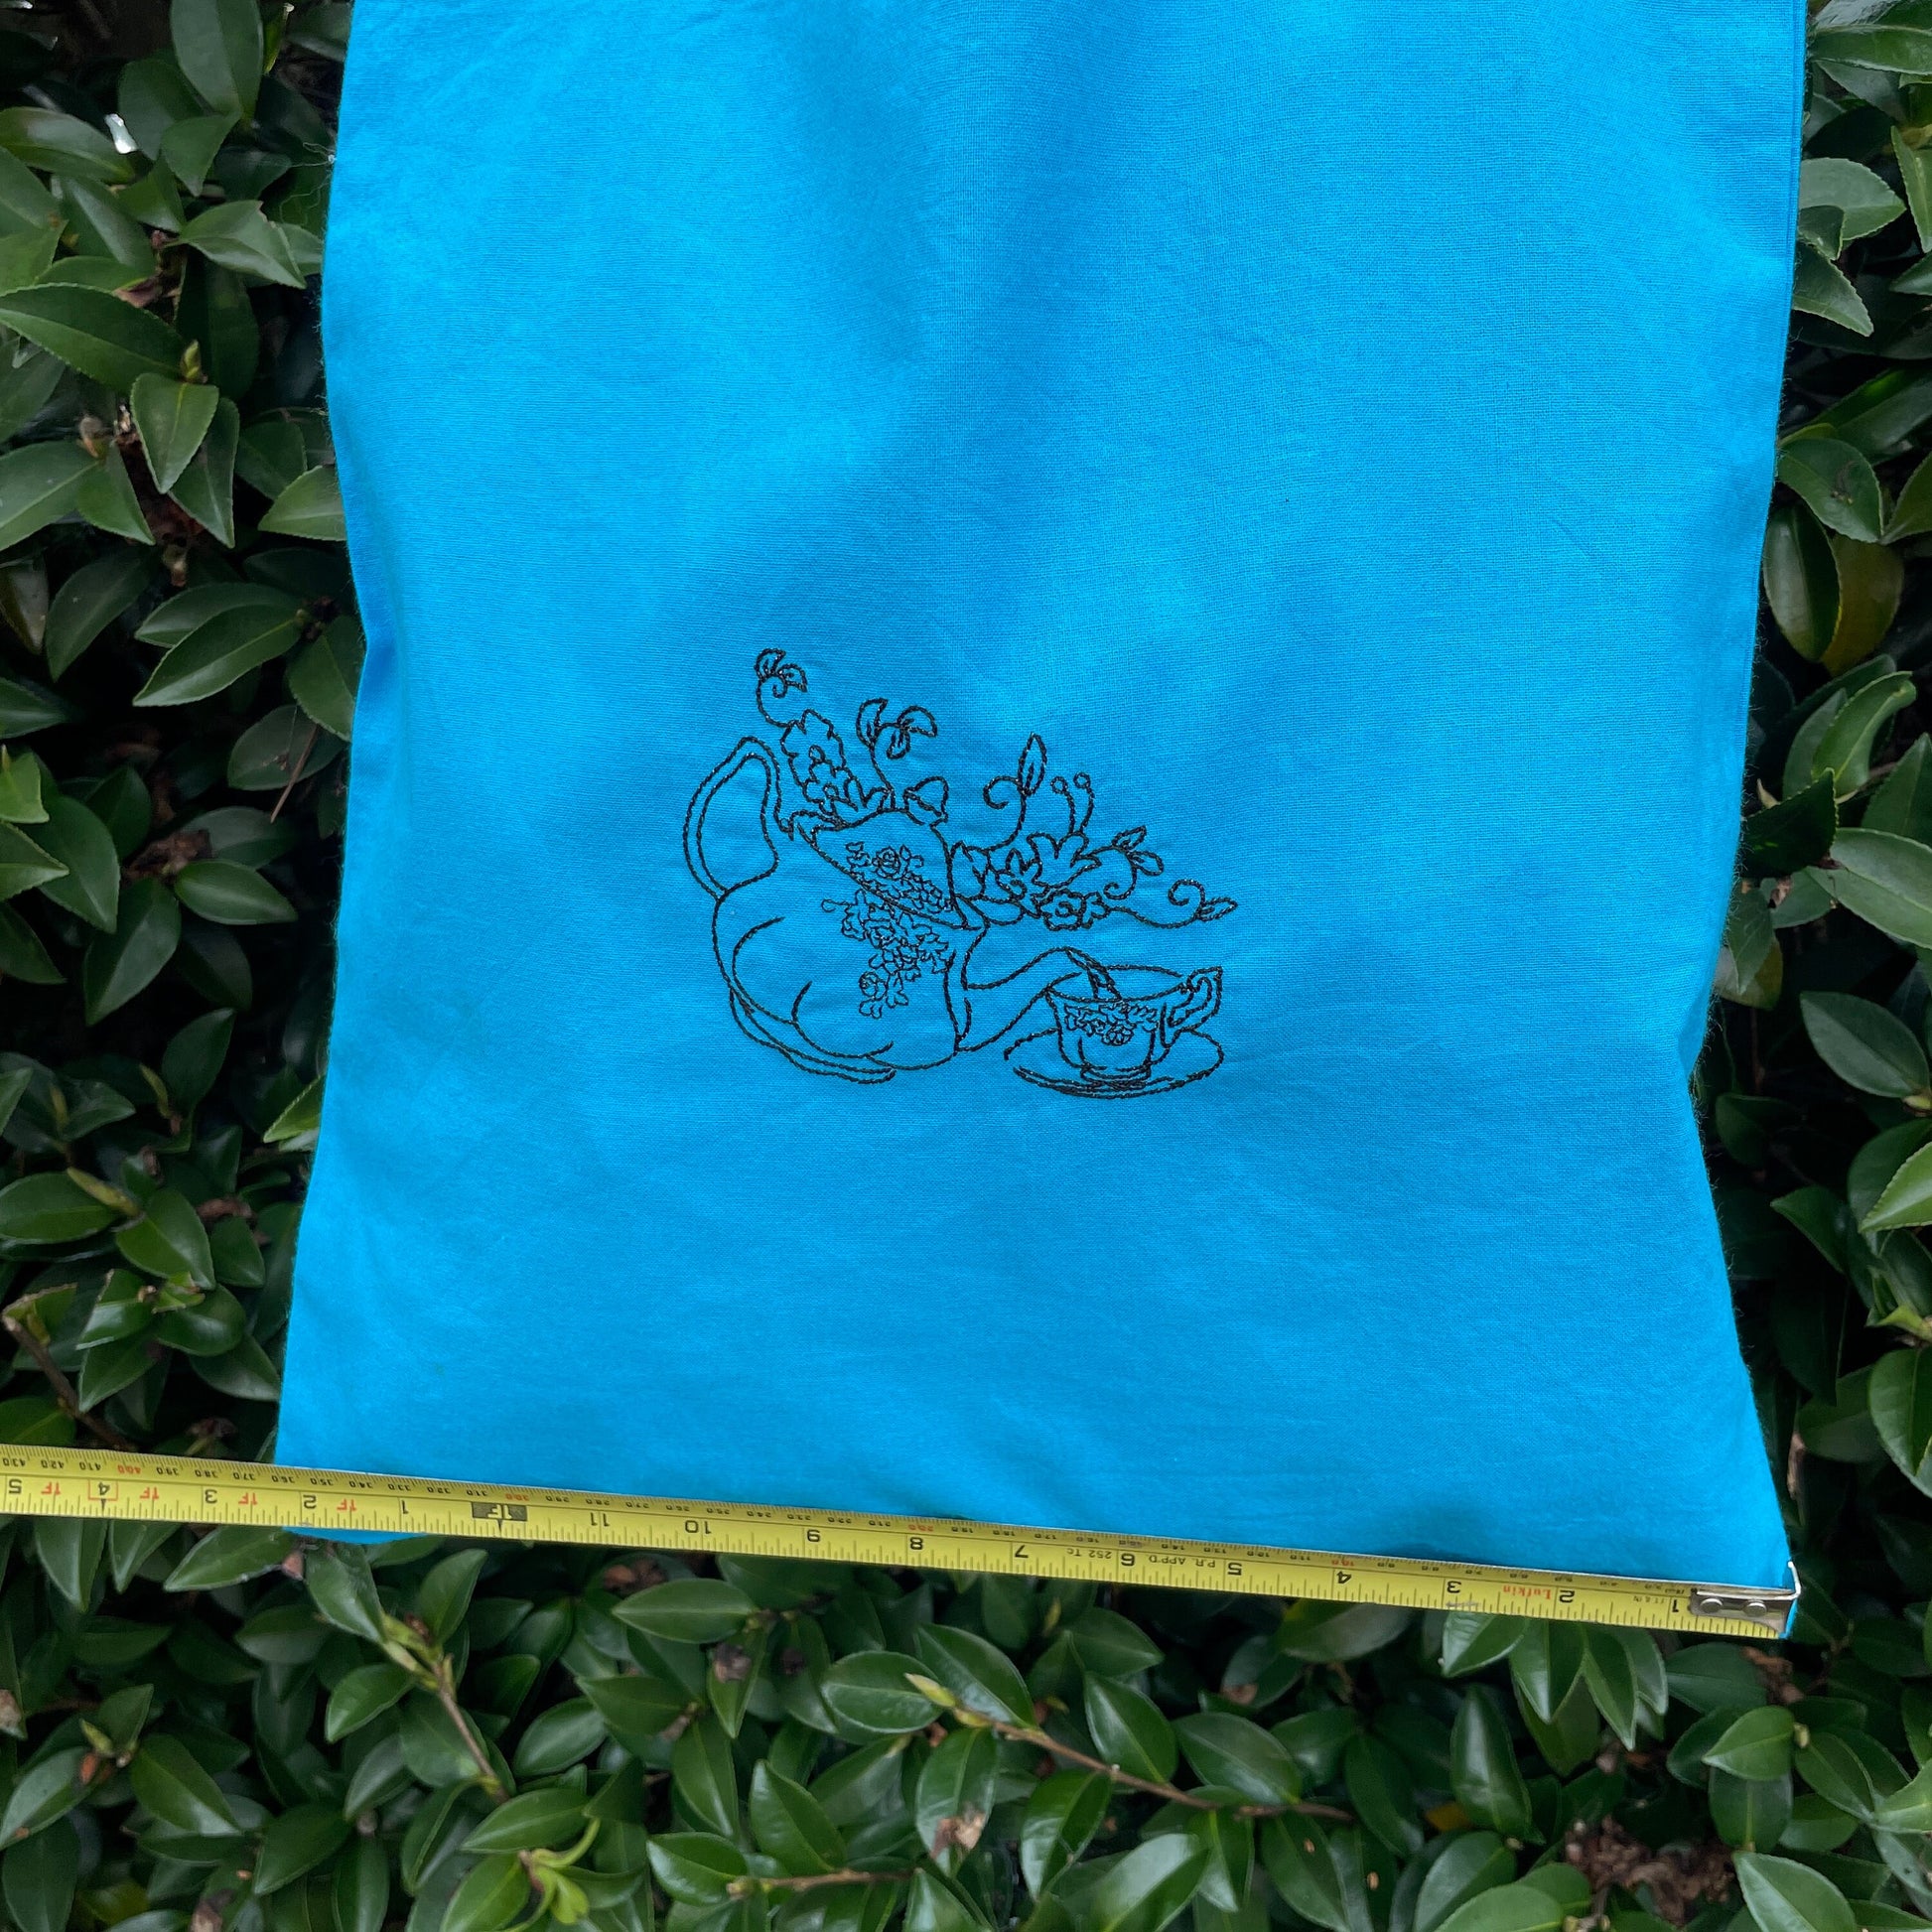 Embroidered tote bag. Teapot and teacup. Cotton tote bag. Shopper tote. Tote Canvas.|*gifts